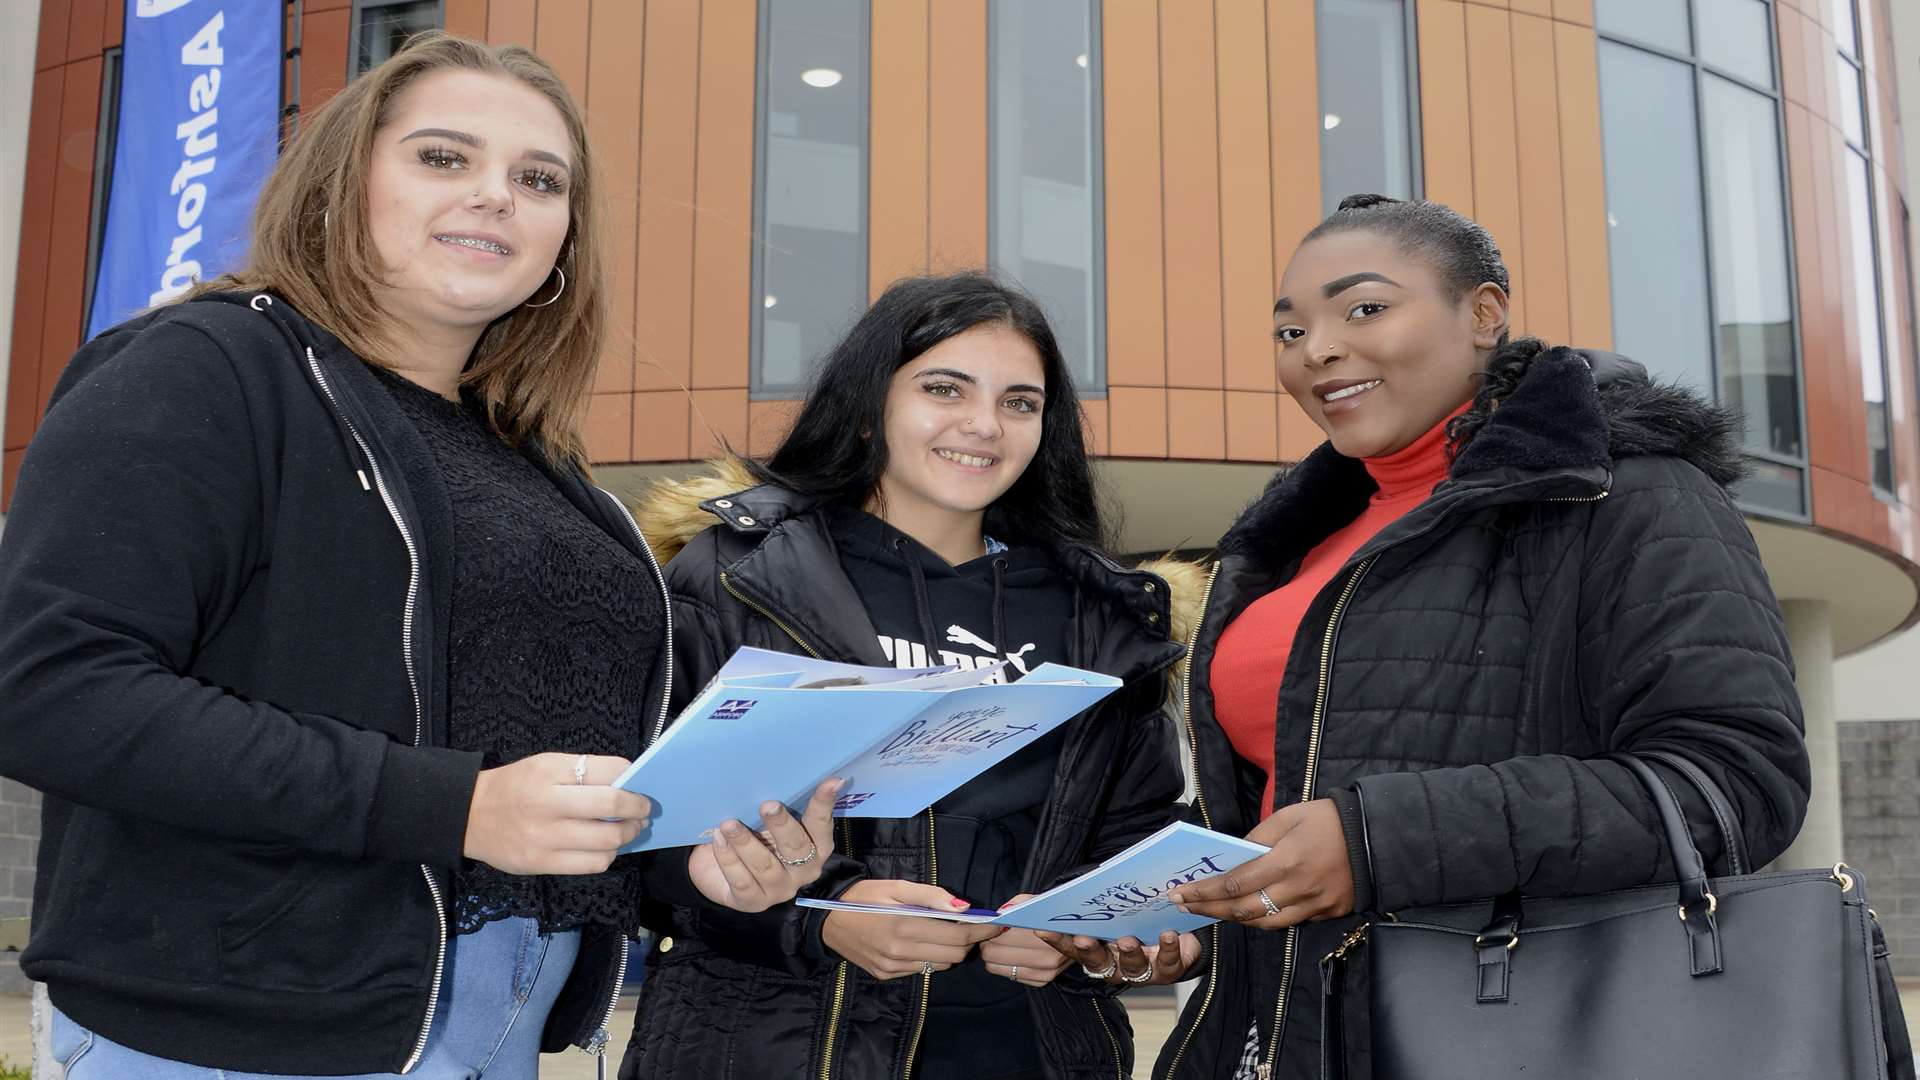 Chloe Day, 17, and Talia Scaysbrook, 16, signing up for business studies and Shinnai Gayle for a beauty course